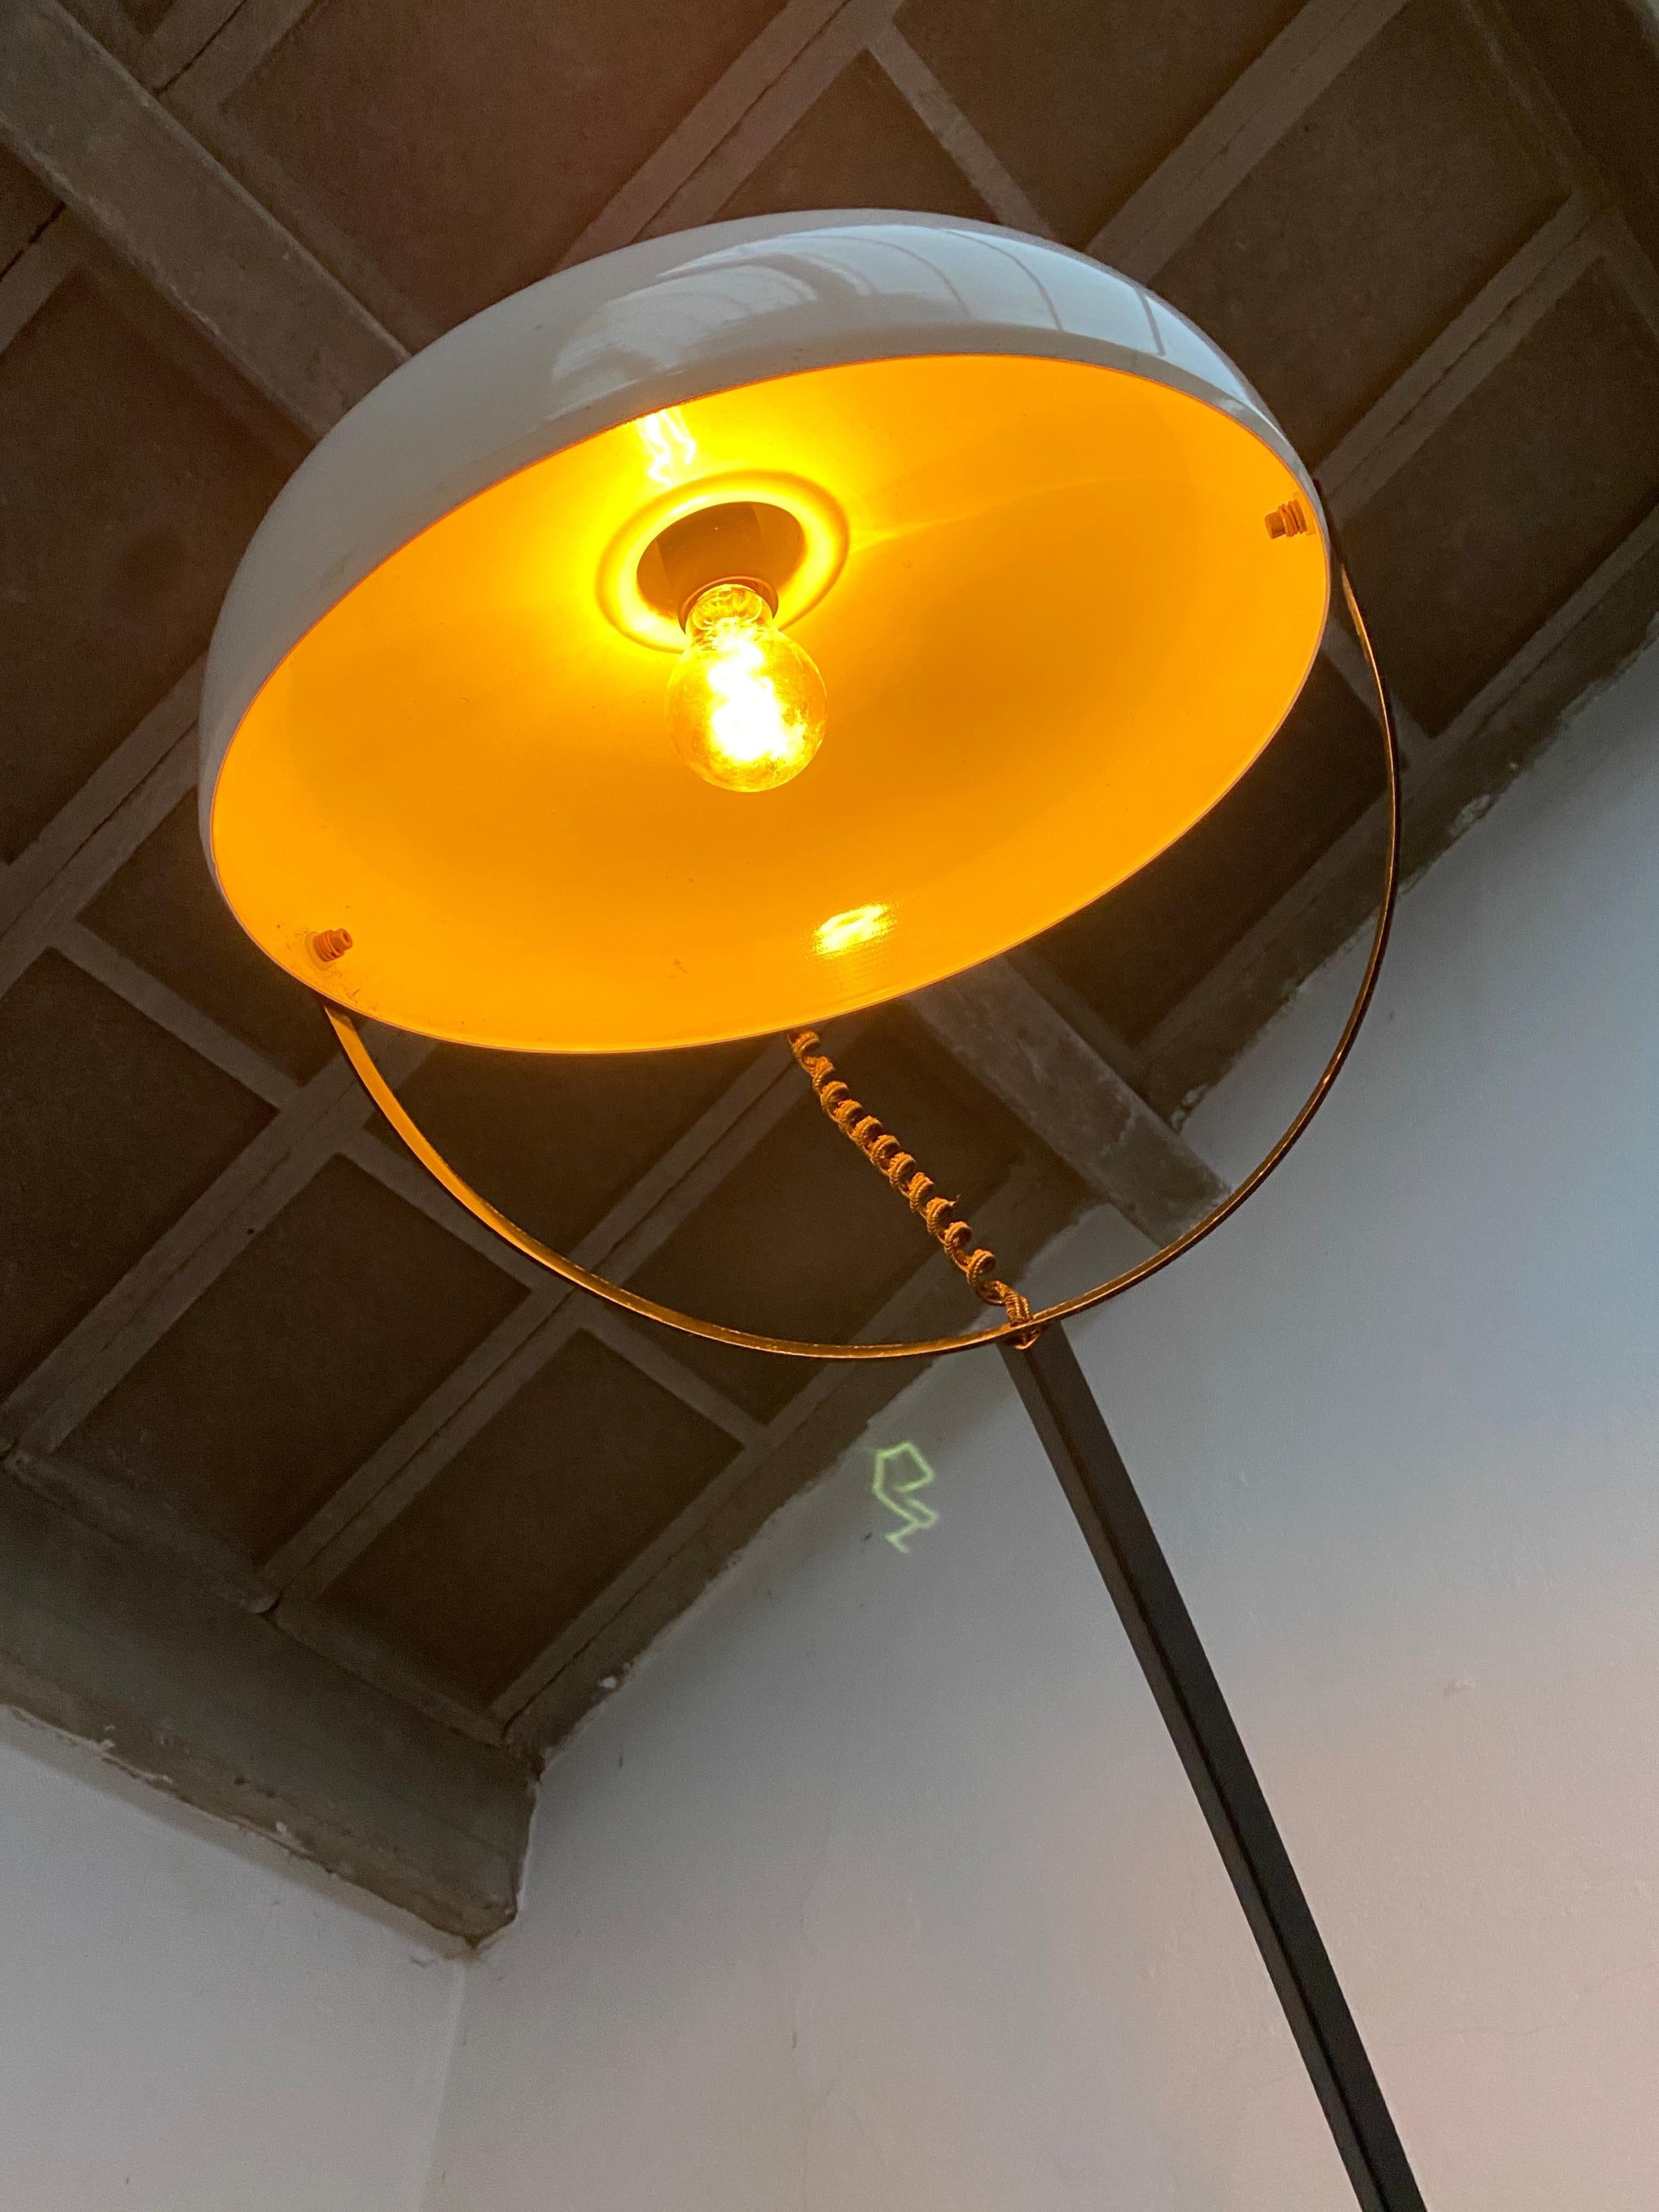 Rare impressive model of a Minimalist cantilevered wall lamp by Italian lighting company Reggiani from the early 1960s.

The lamp has an impressive total height of 320cm or 10ft 5.98inch

The V shaped enameled metal arch comes in 2 parts and